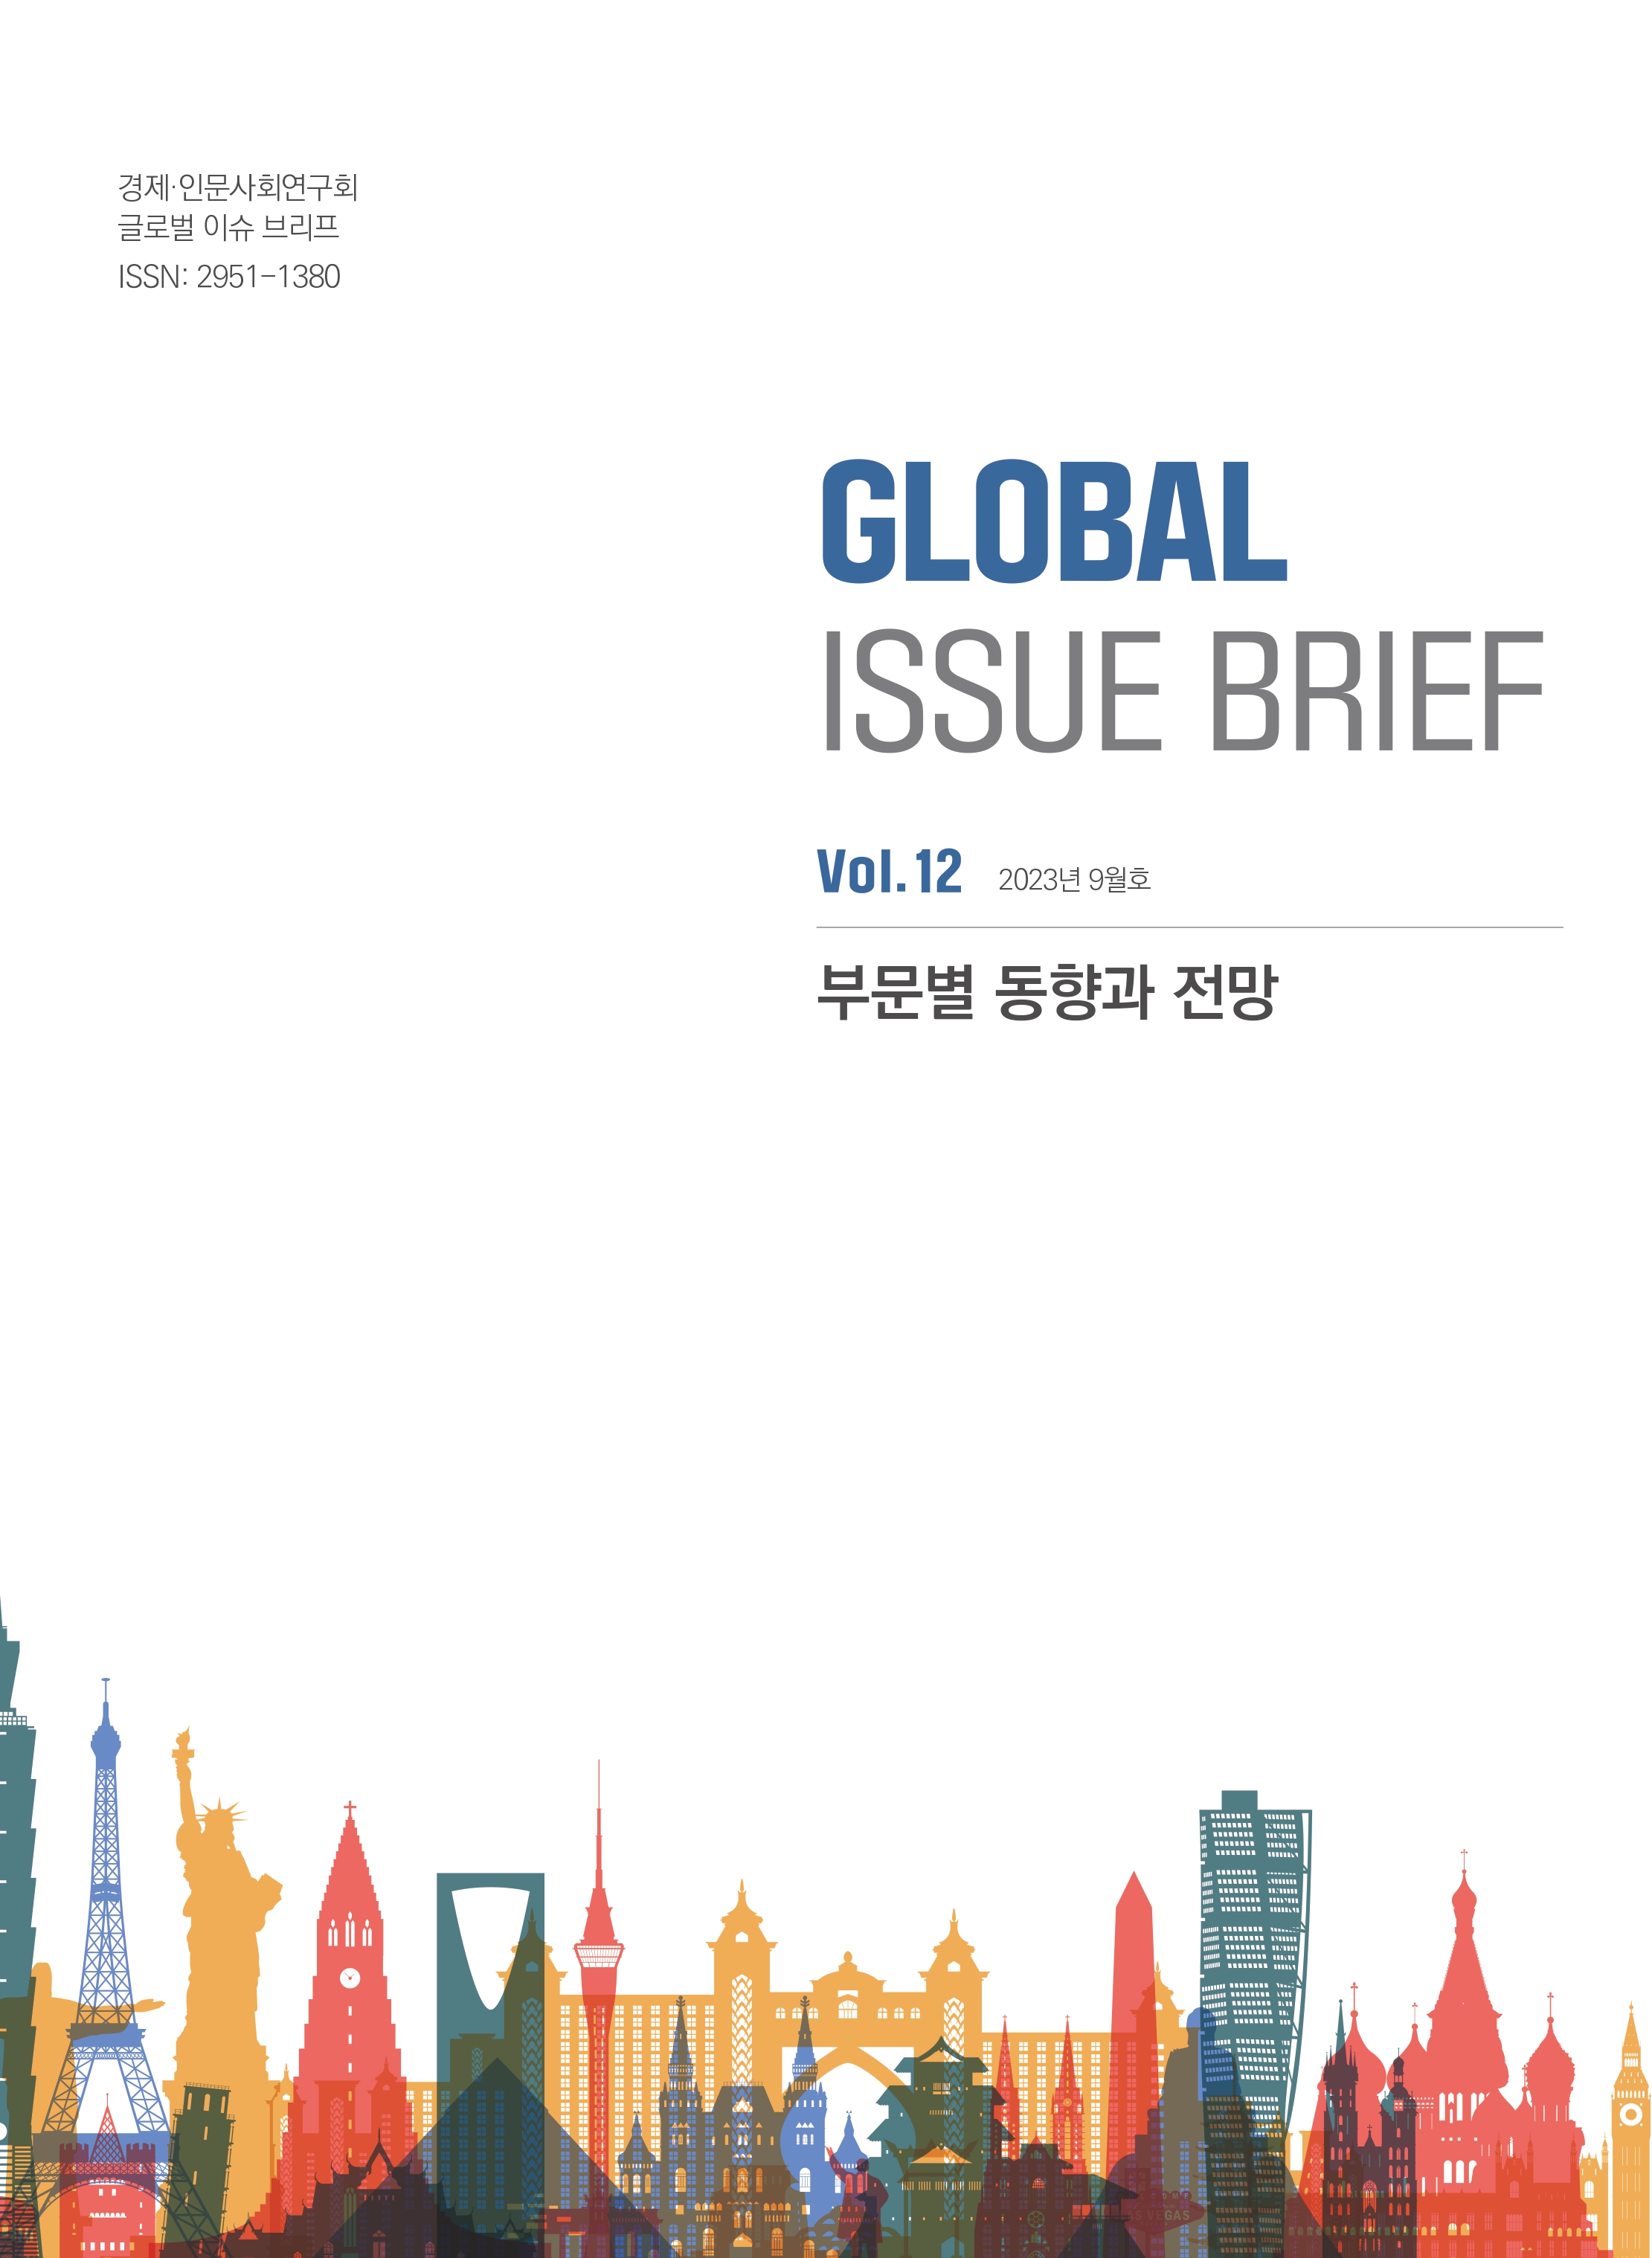 [Global Issue Brief] Vol.12